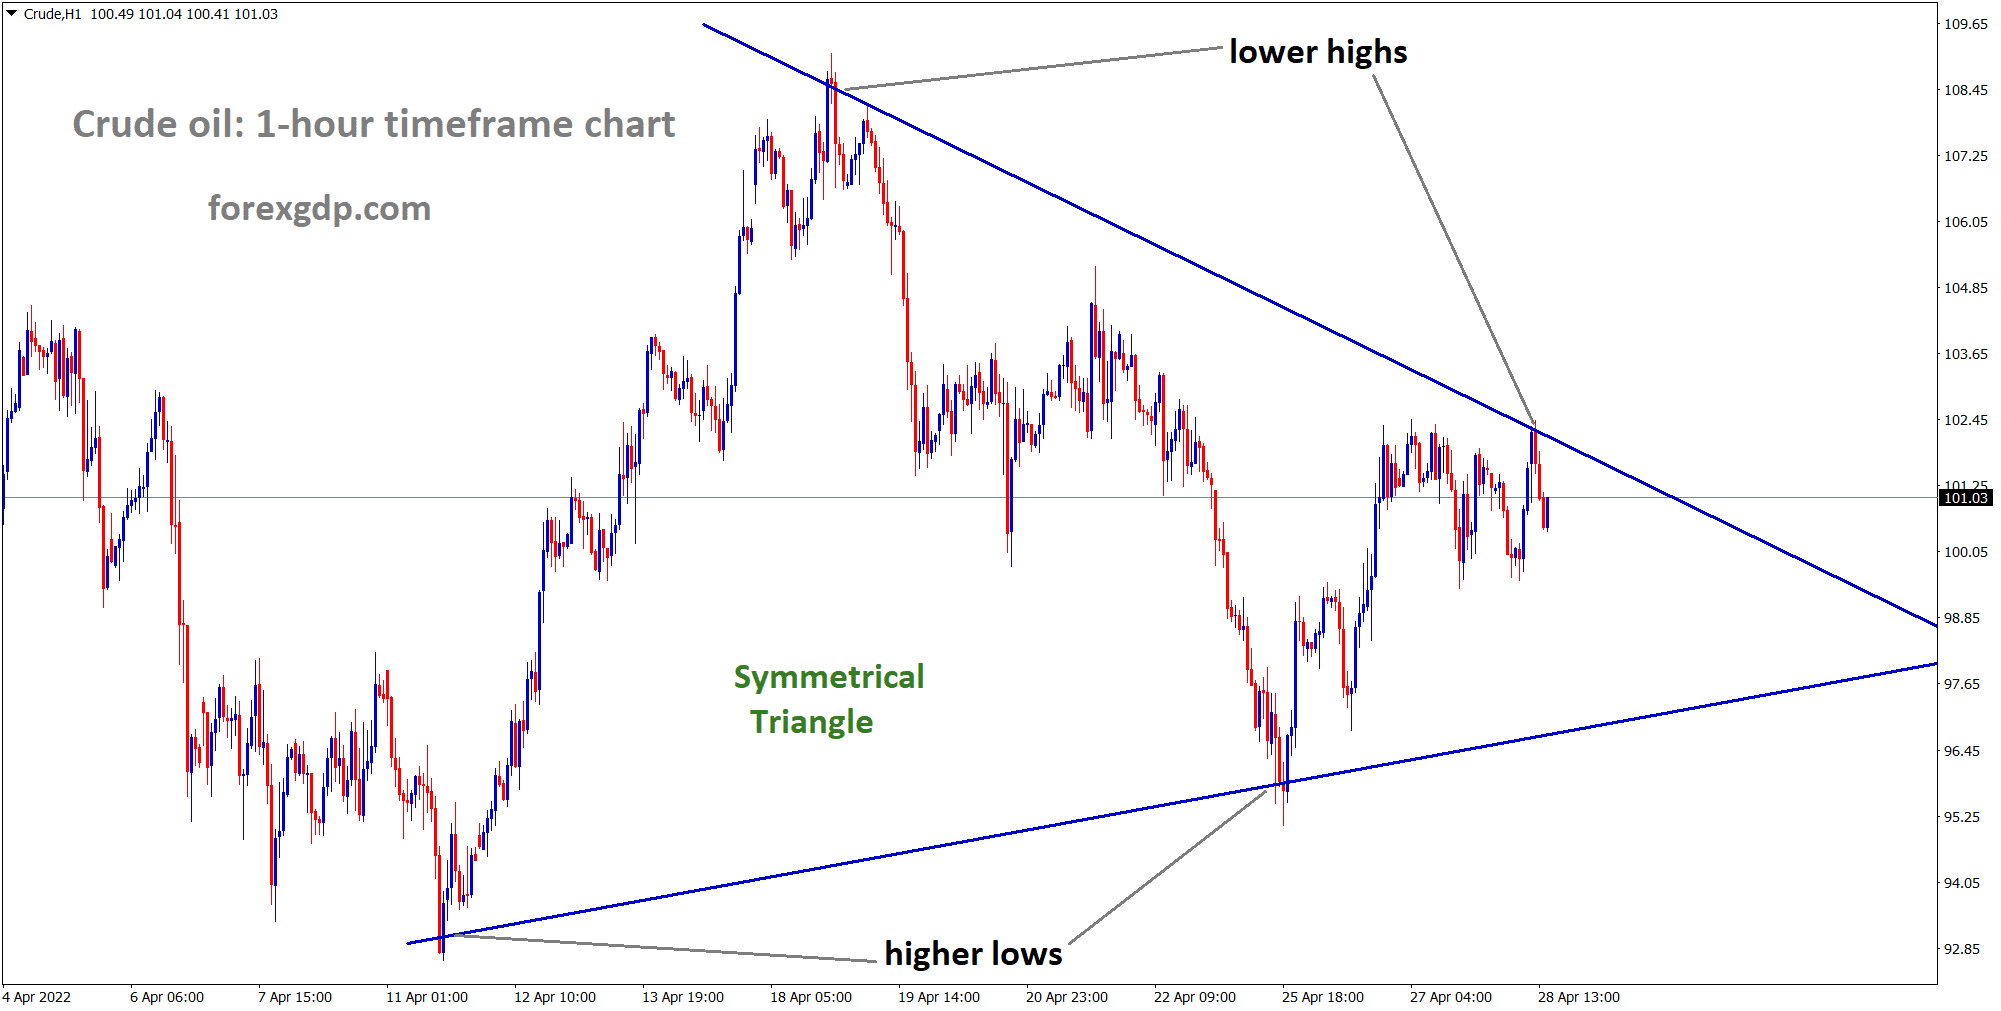 Crude oil market moving in symmetrical triangle and reached lower high area in 1 hour Timeframe chart